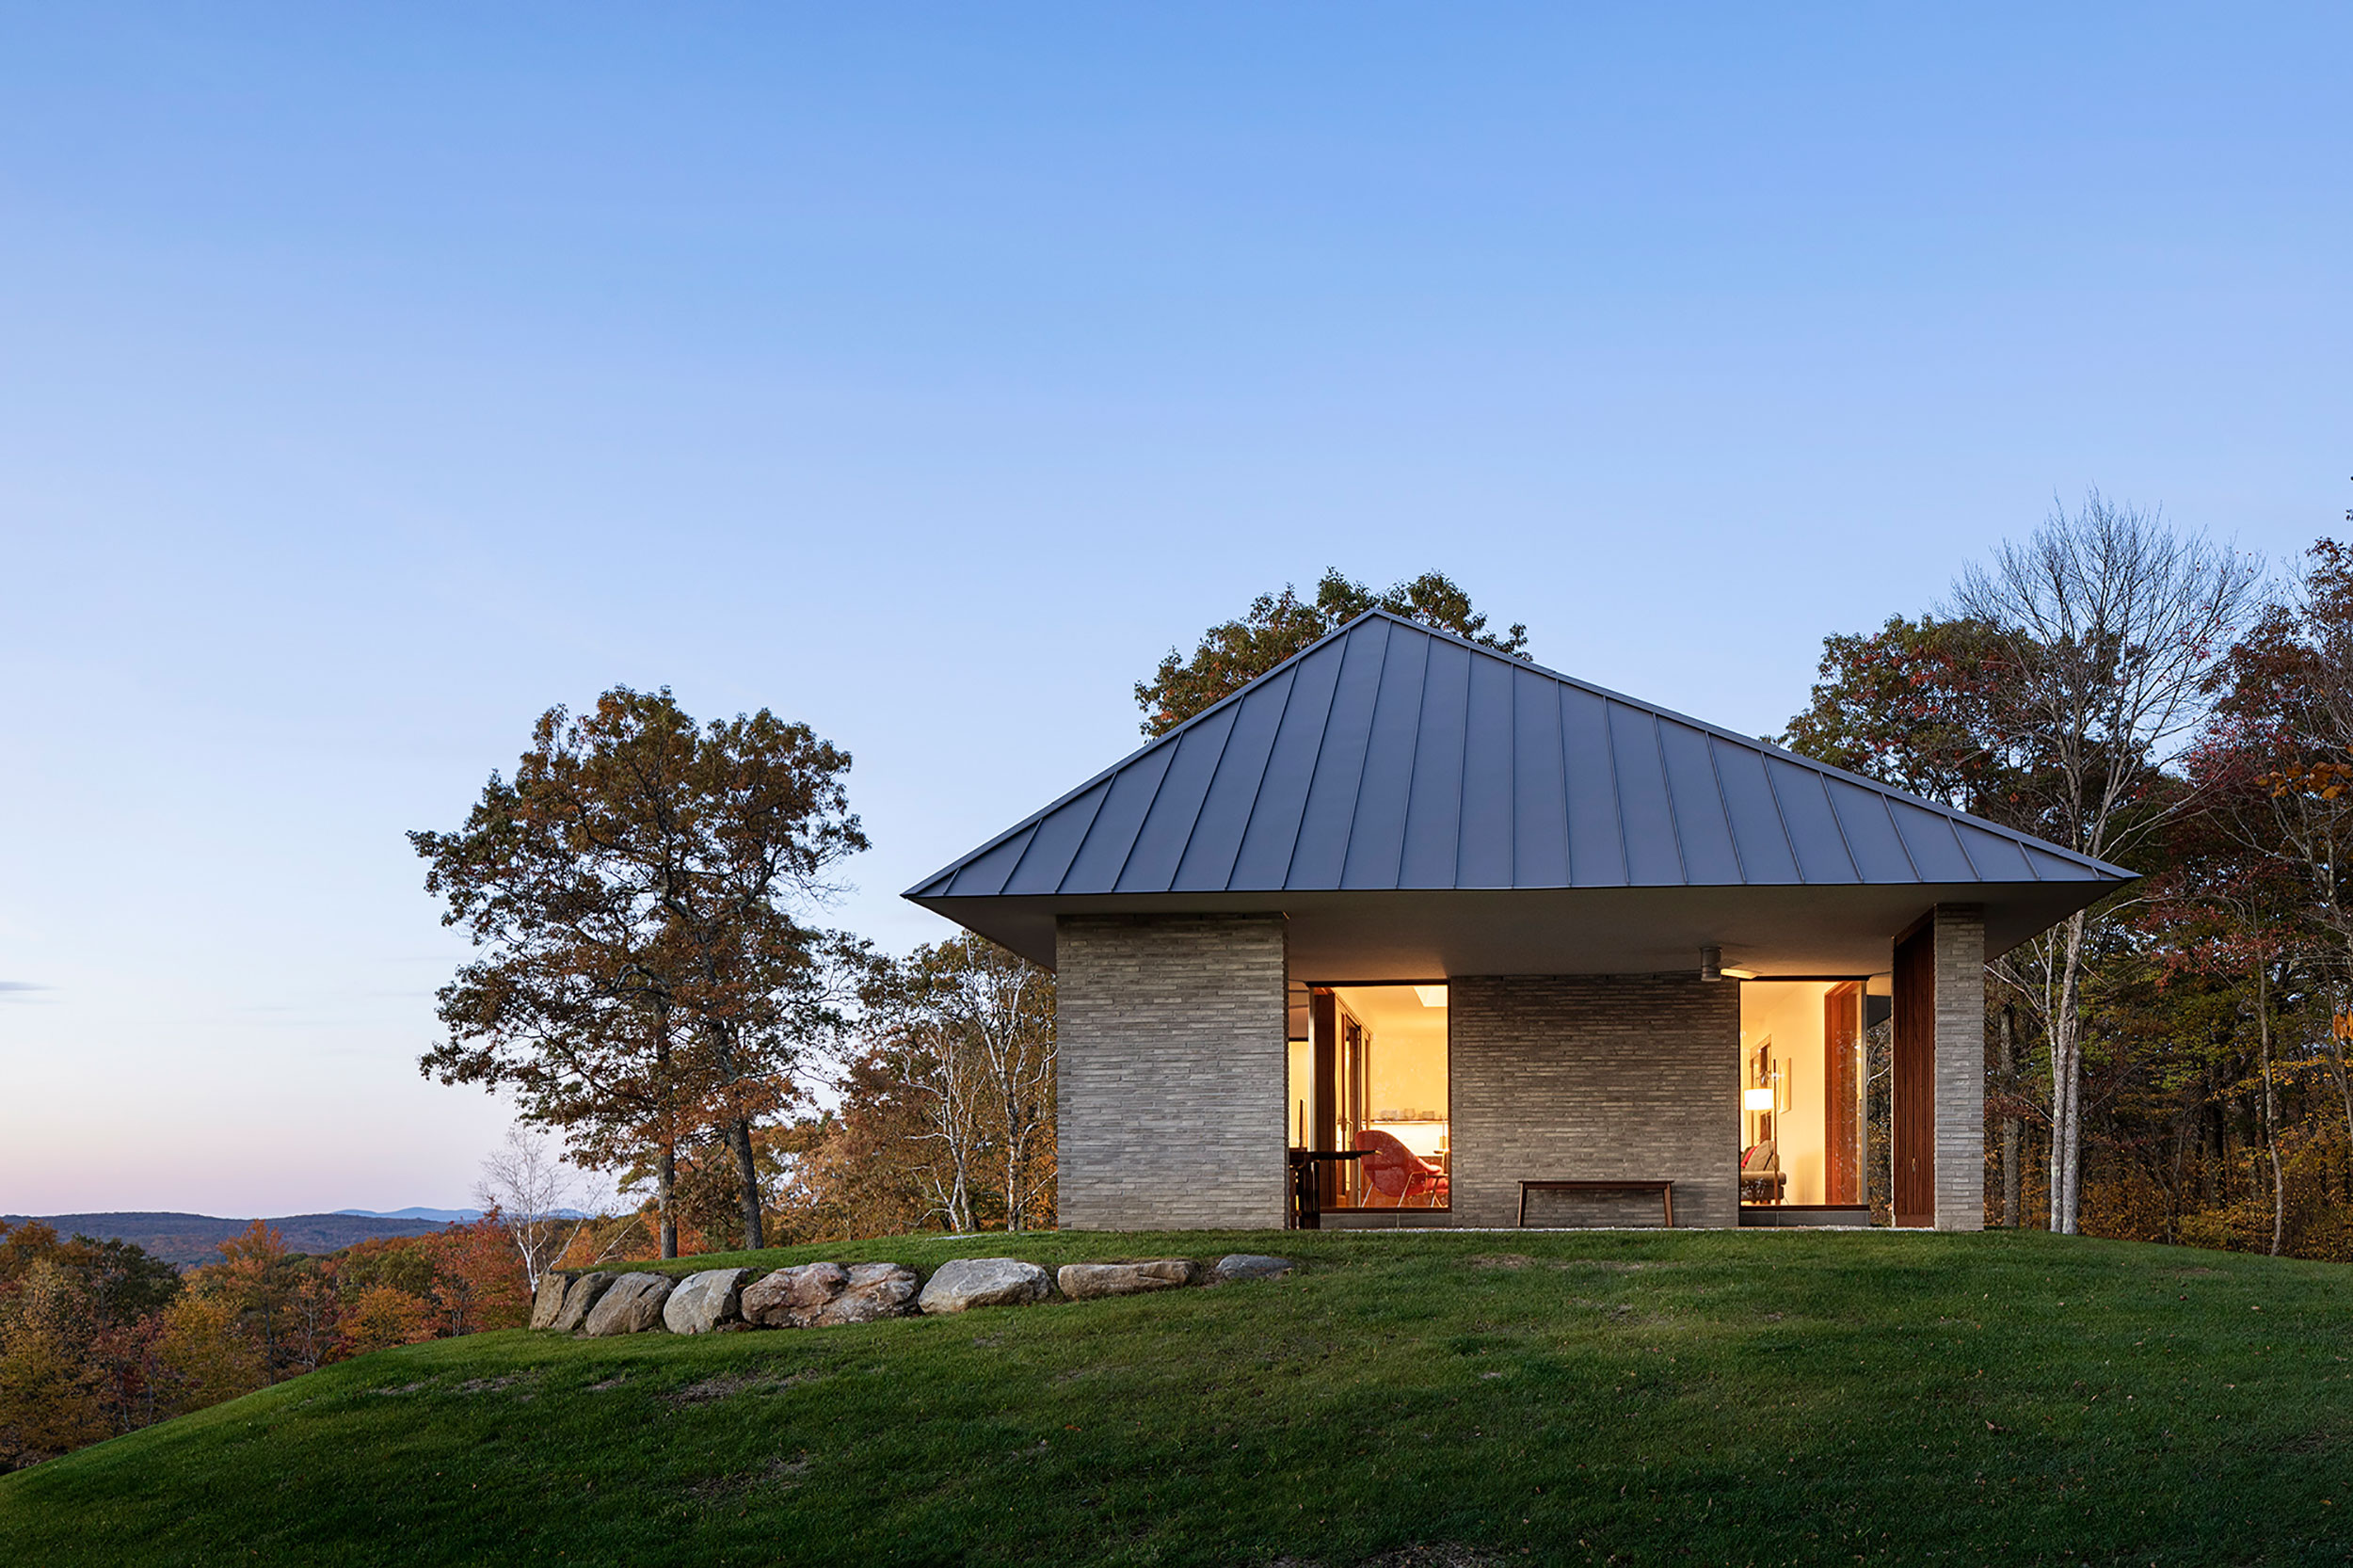 Mount Mauwee House by Paul Schulhof, AIA, in South Kent, CT. Photo: Michael Moran.